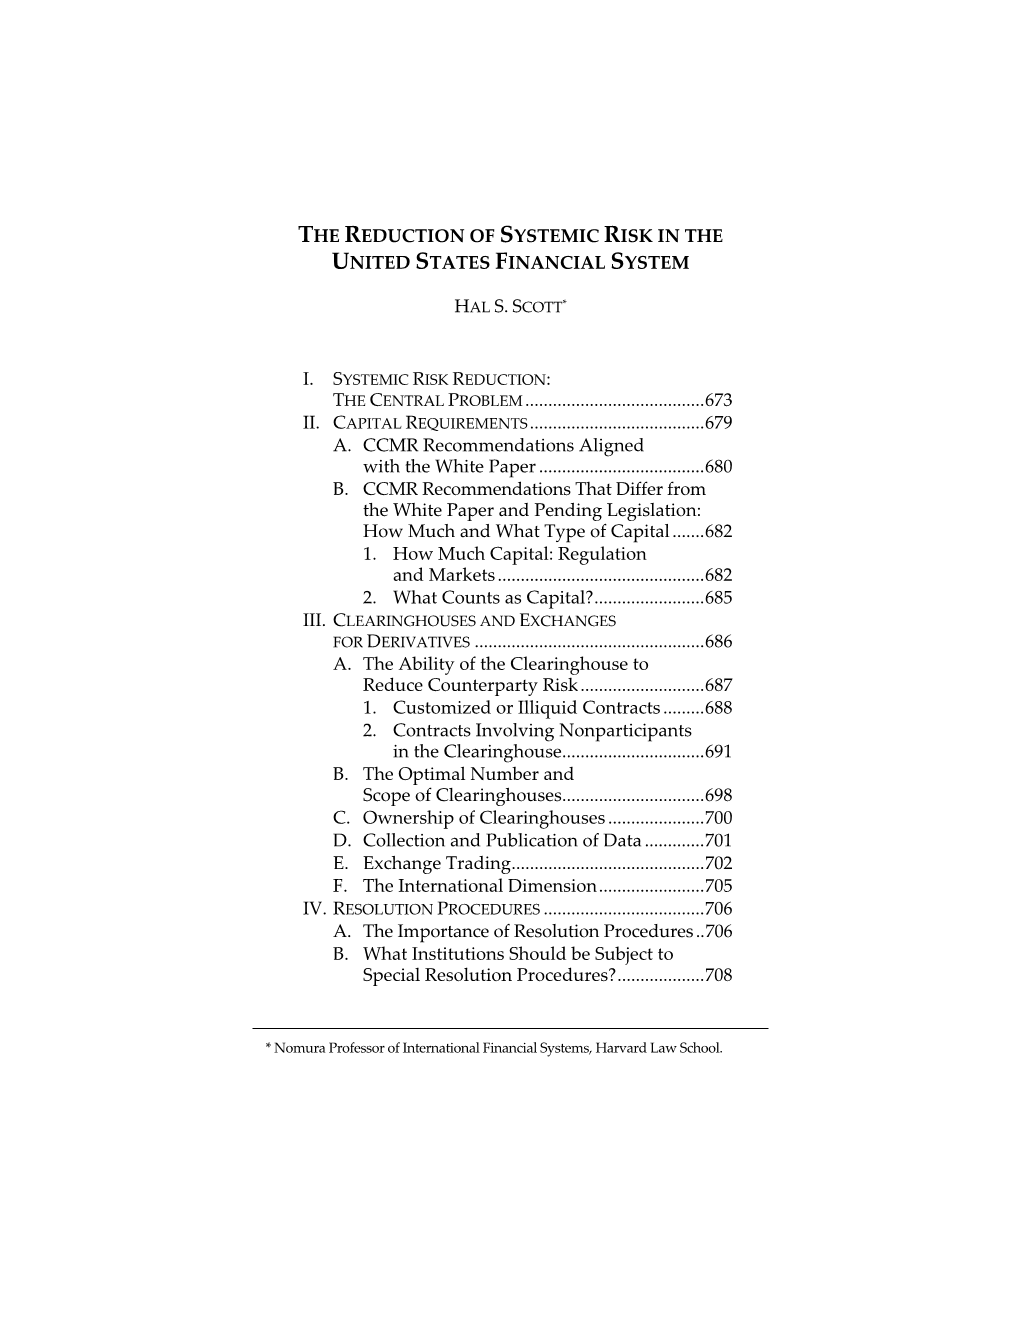 The Reduction of Systemic Risk in the United States Financial System